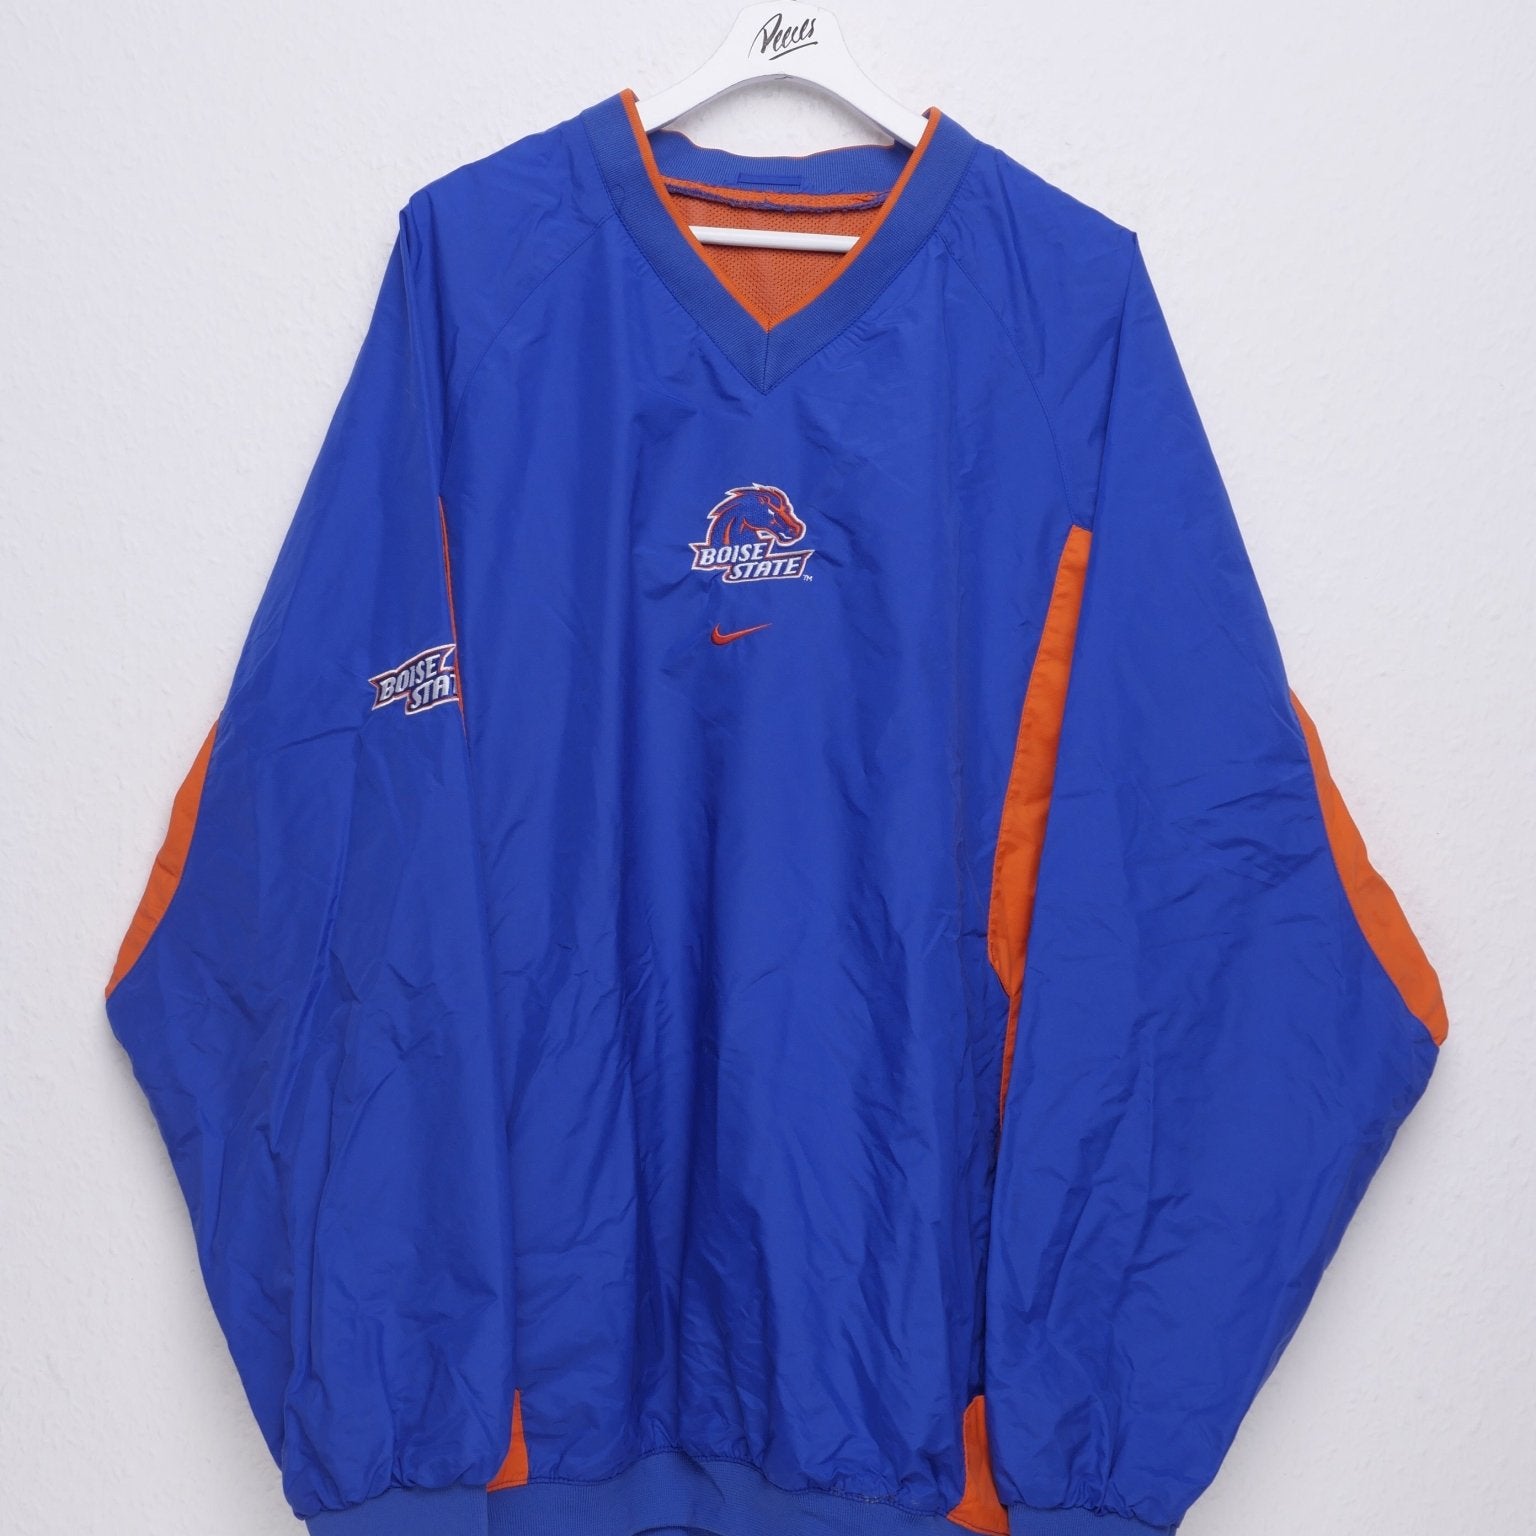 Nike Boise State Broncos Football embroidered Middle Swoosh Jersey Sweater - Peeces